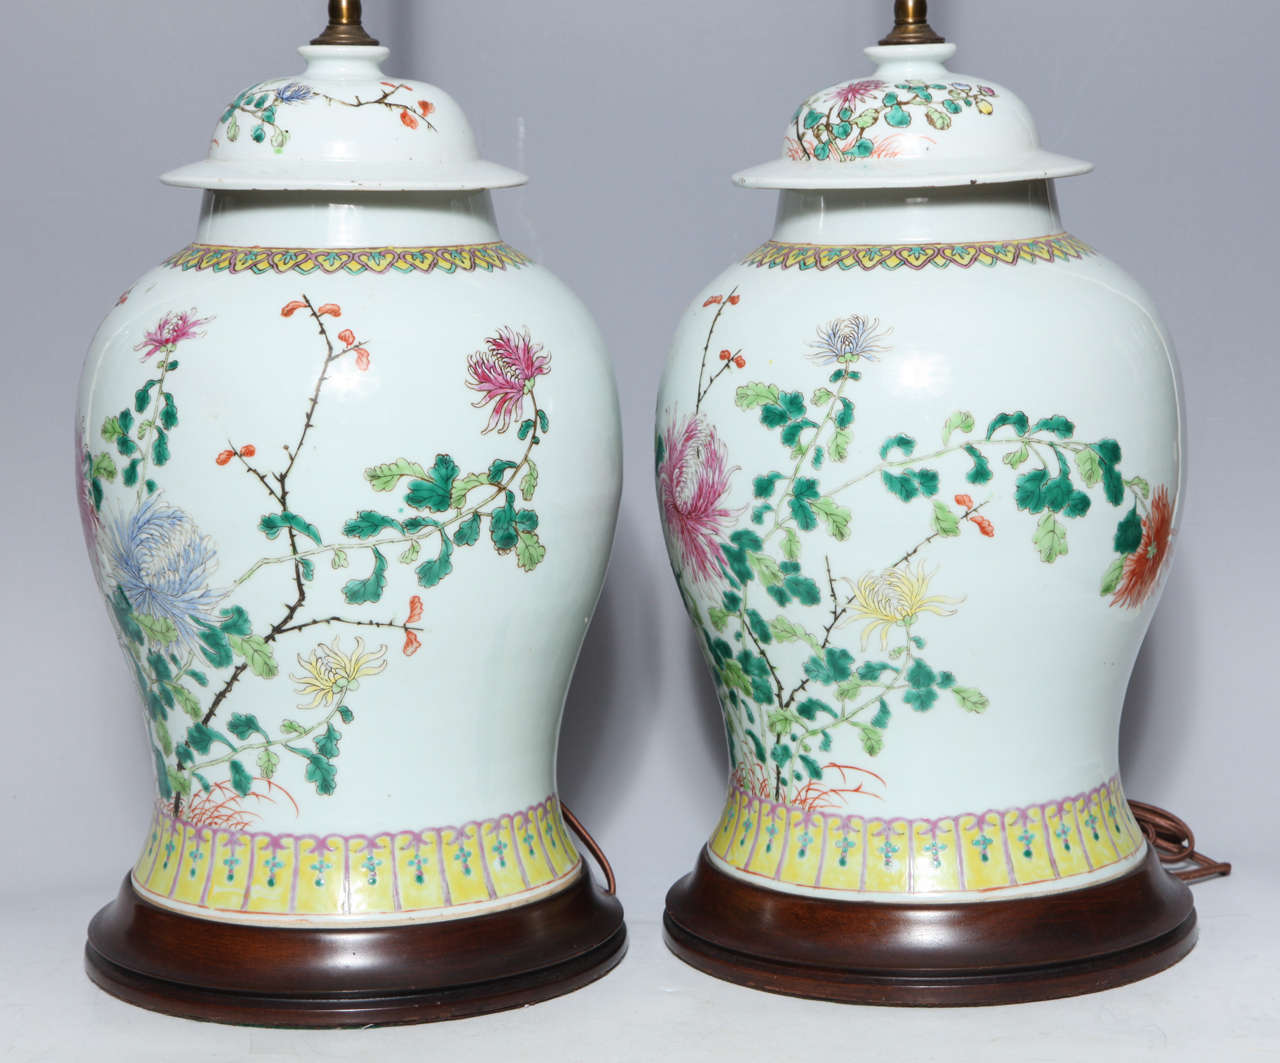 Pair of 19th Century Chinese Porcelain Ginger Jars Converted into Table Lamps For Sale 3